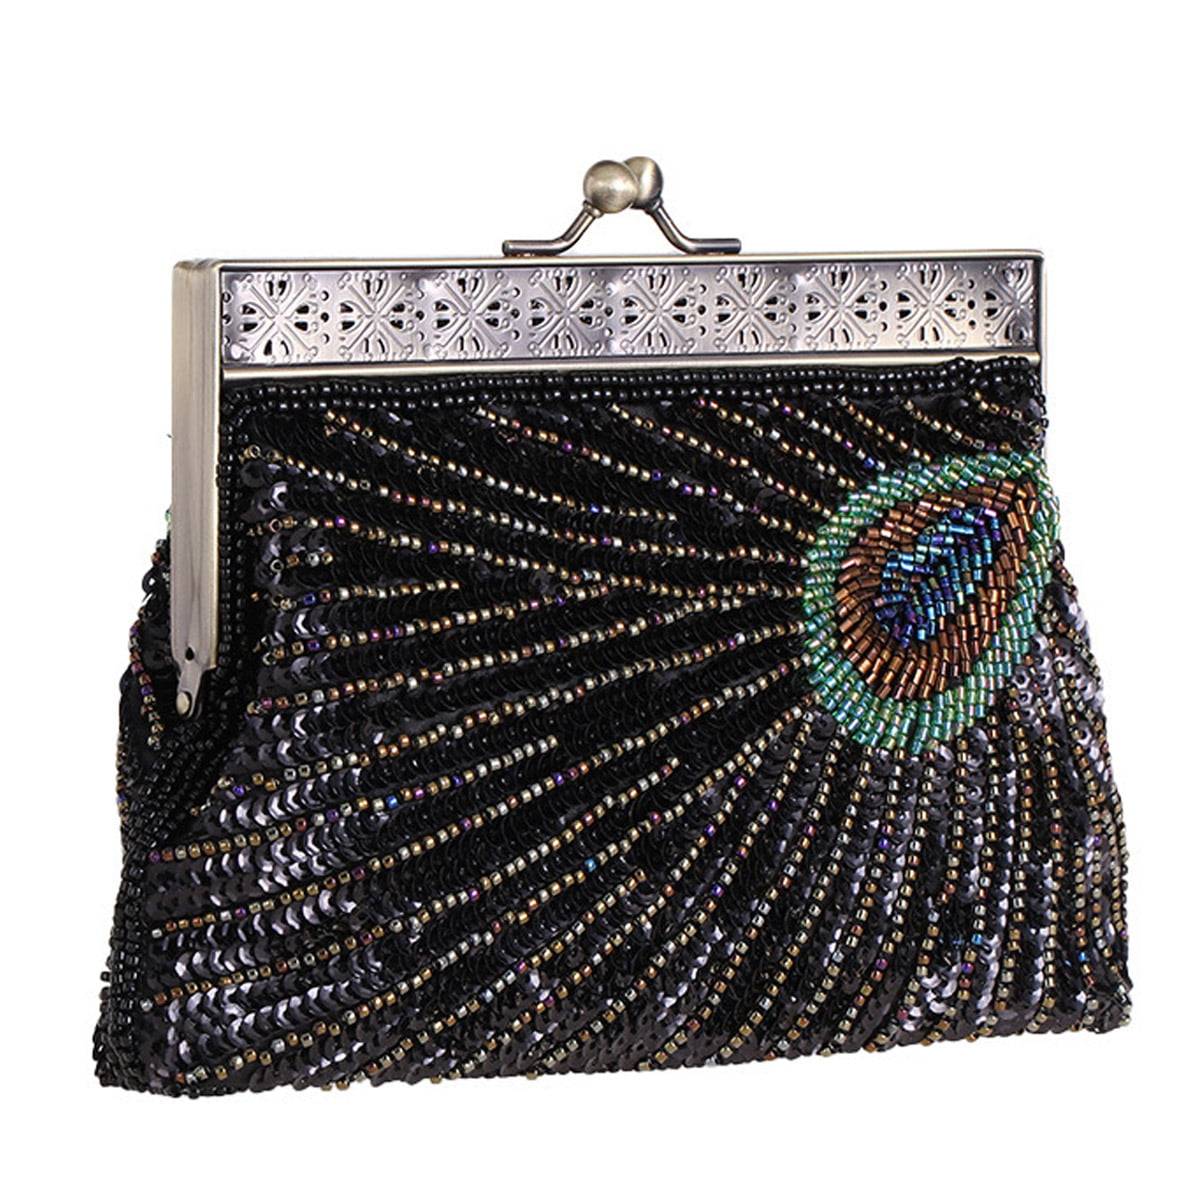 Clutch Bag Evening Bag For Women, Silver Sparkly Bags Handbags Purse With  Chain Strap Sequins Evening Clutch Dinner Bag 1pcs